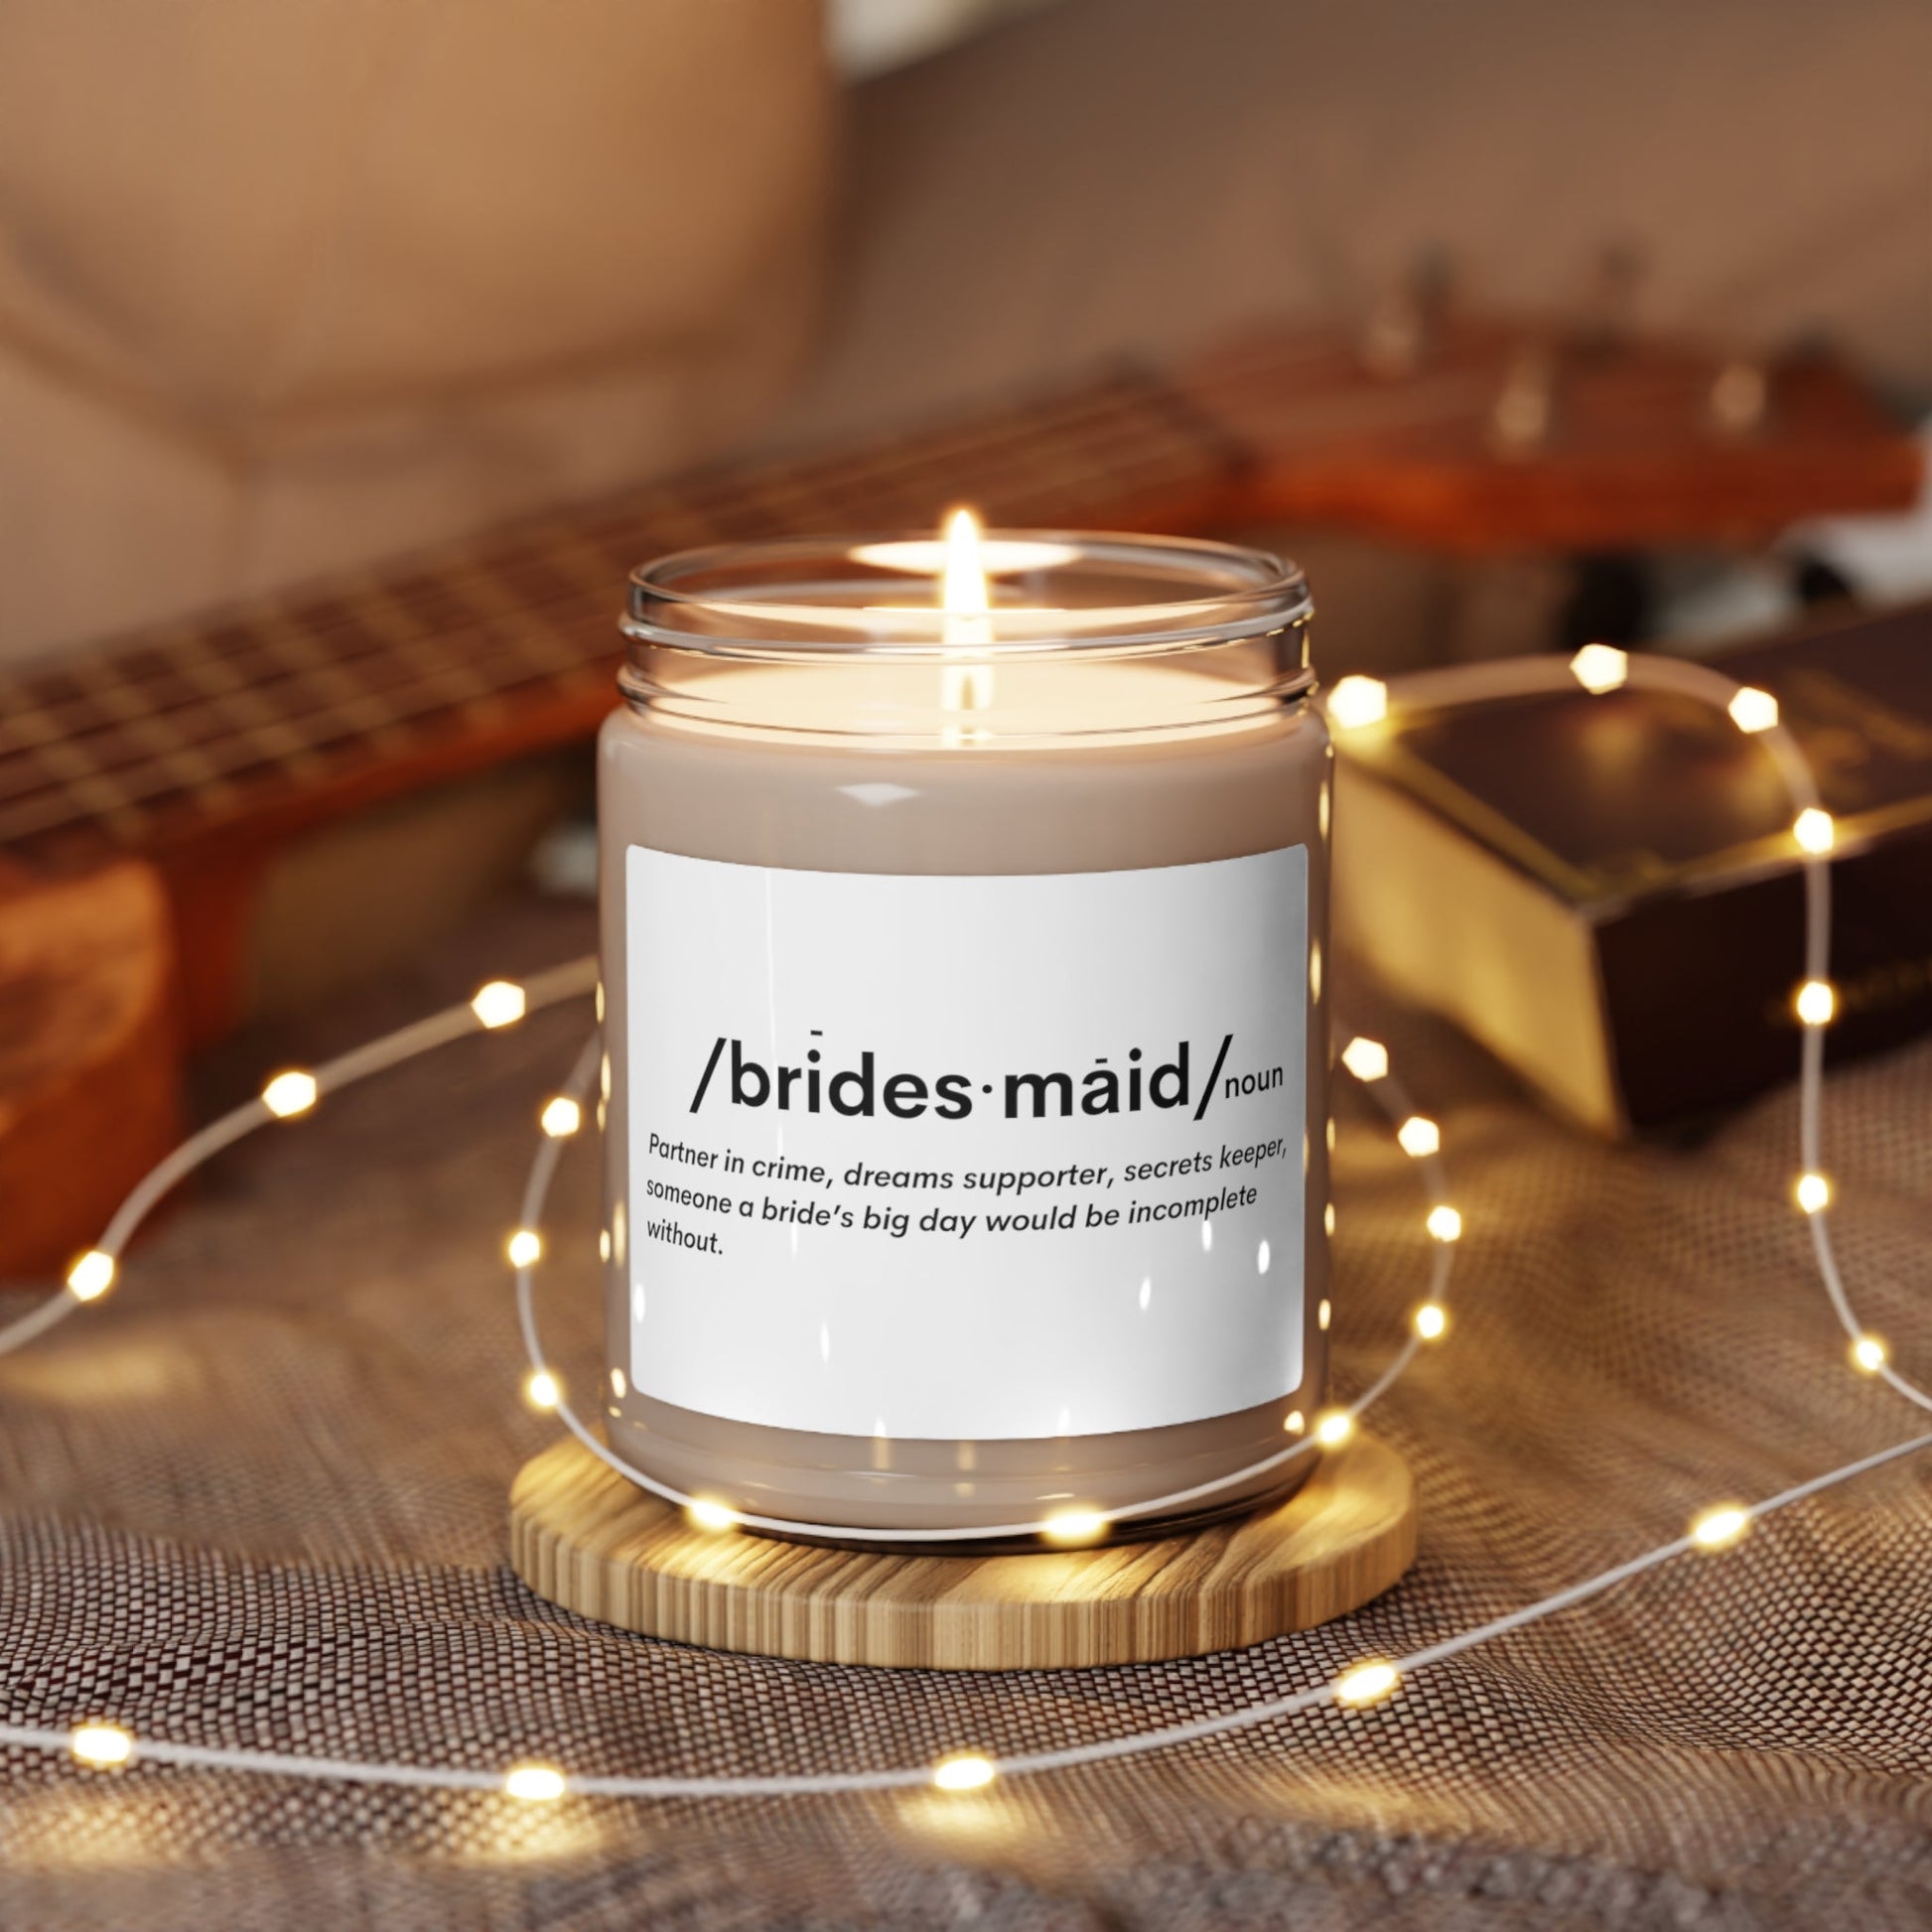 Get trendy with Bridesmaid Definition Candle - Home Decor available at Good Gift Company. Grab yours for $21 today!